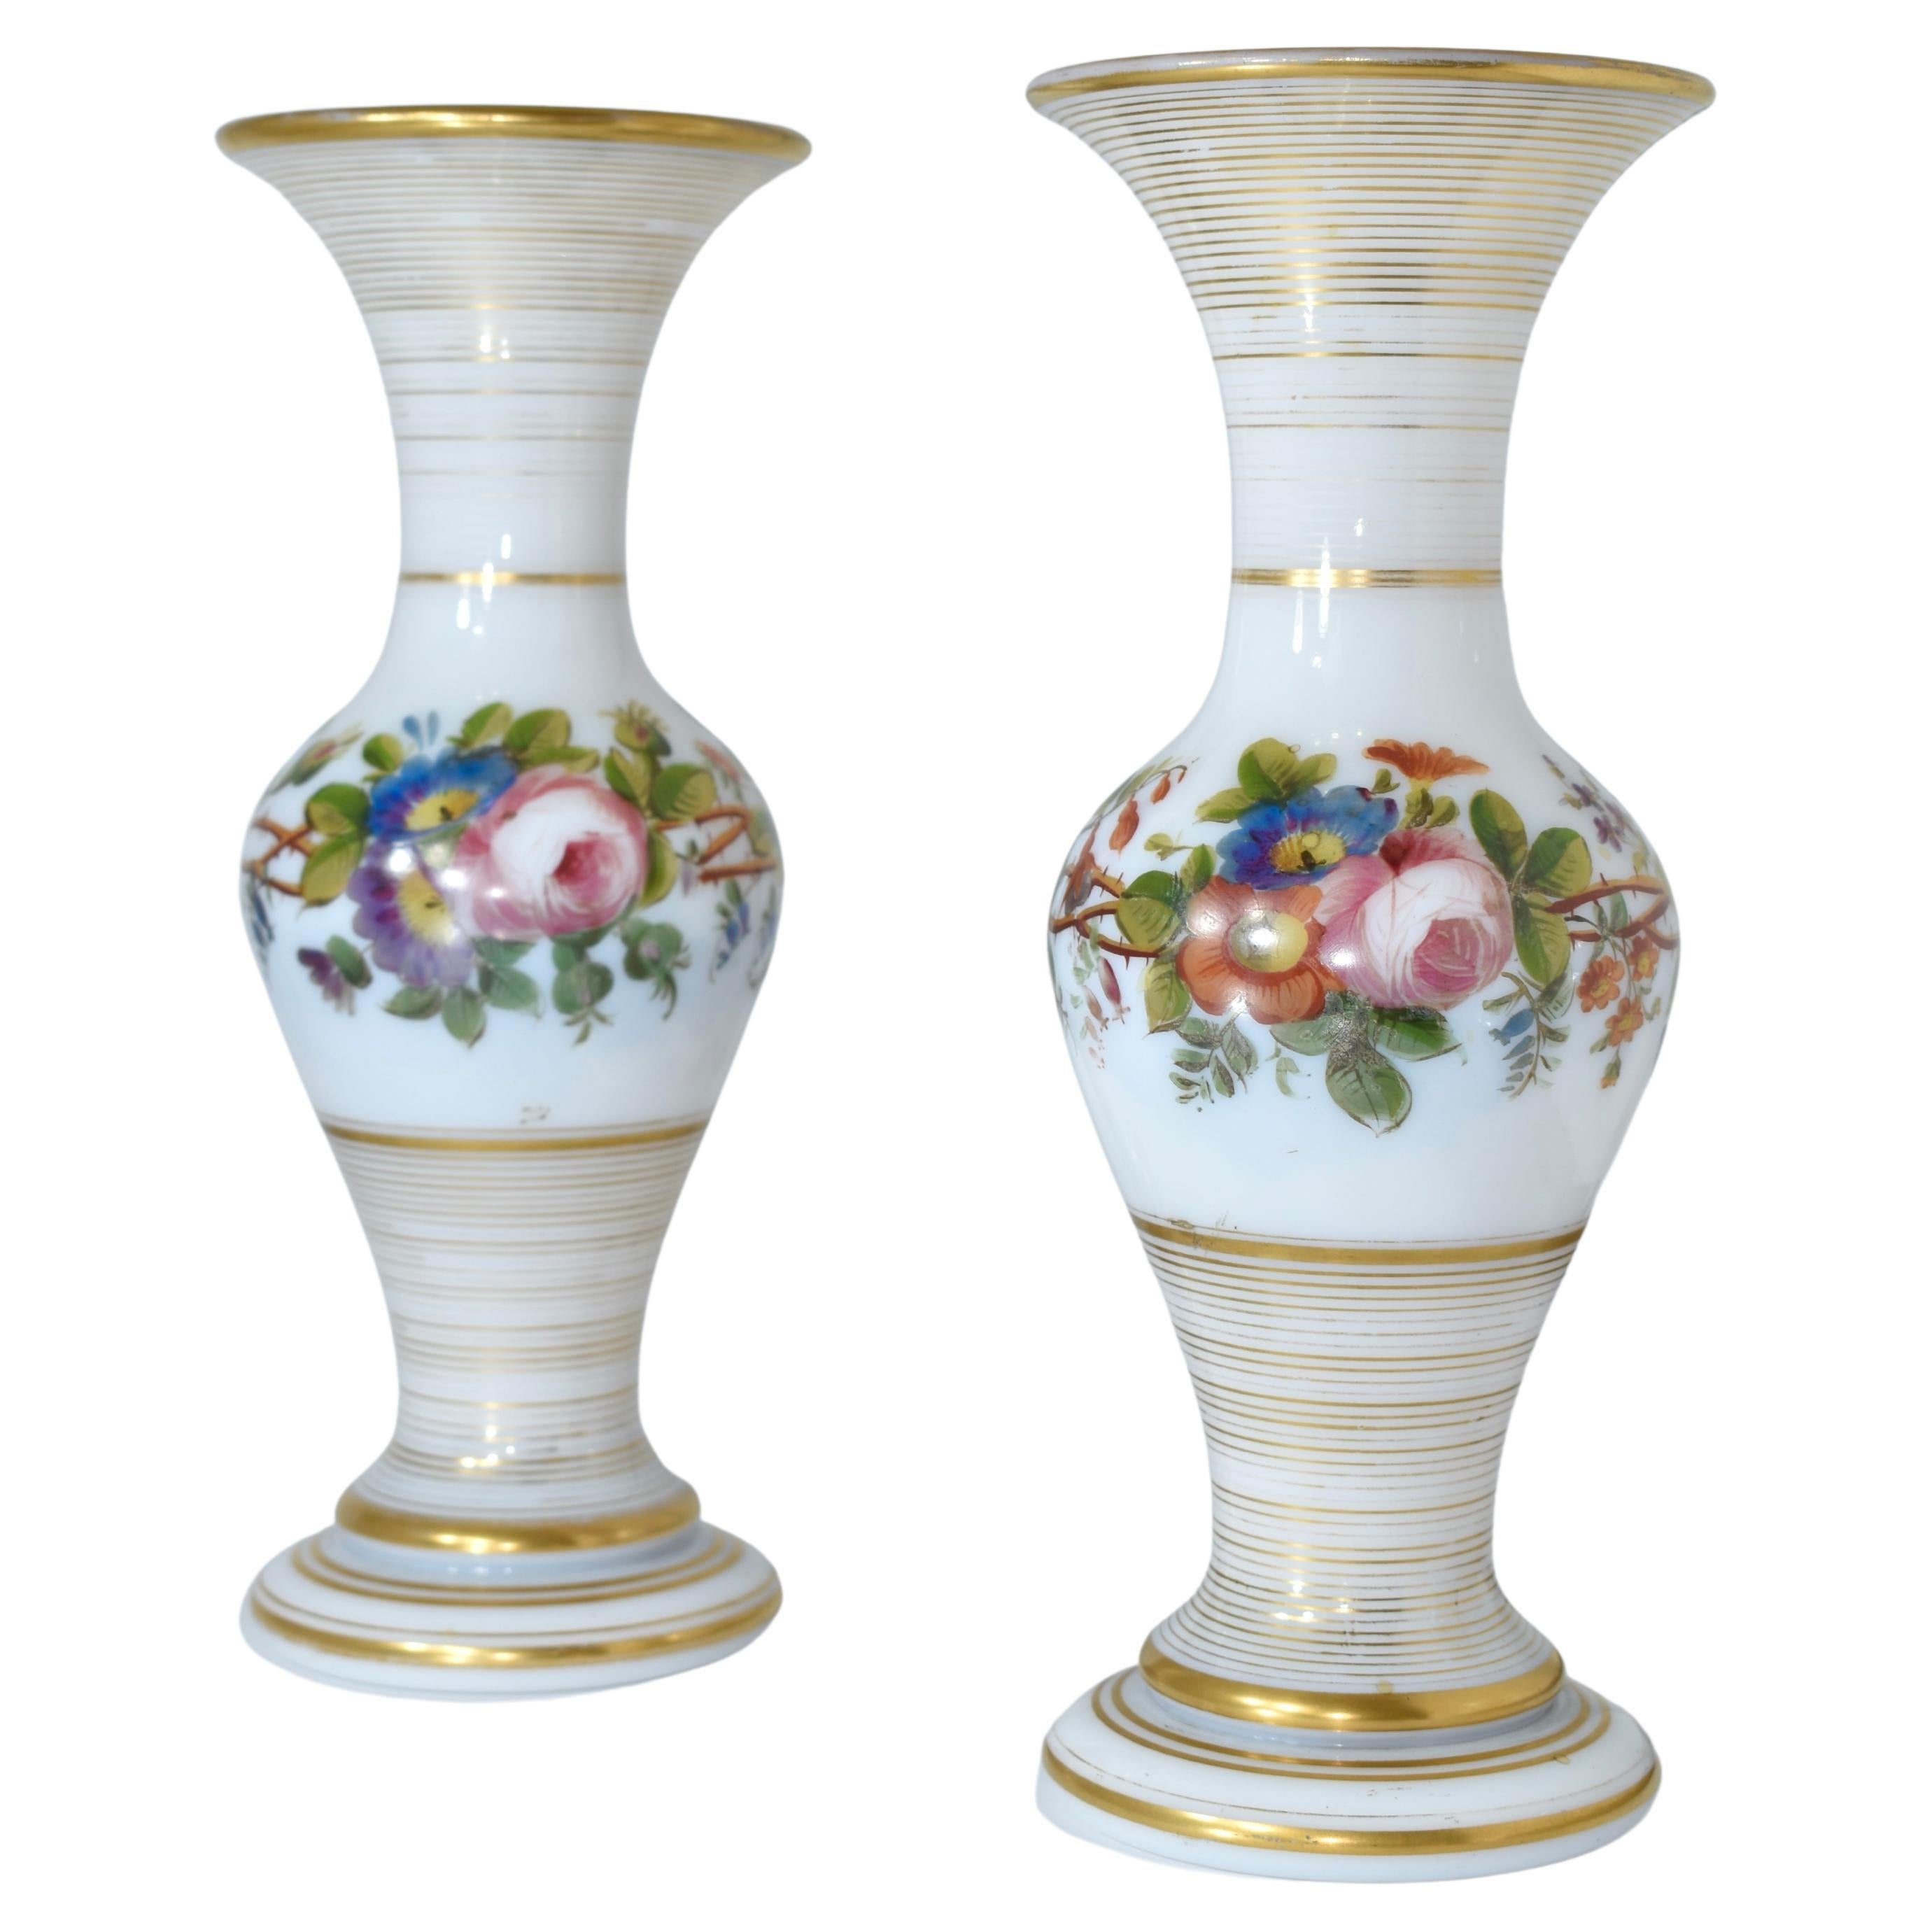 Antique Pair of Vases, French Opaline by Baccarat, 19th Century For Sale